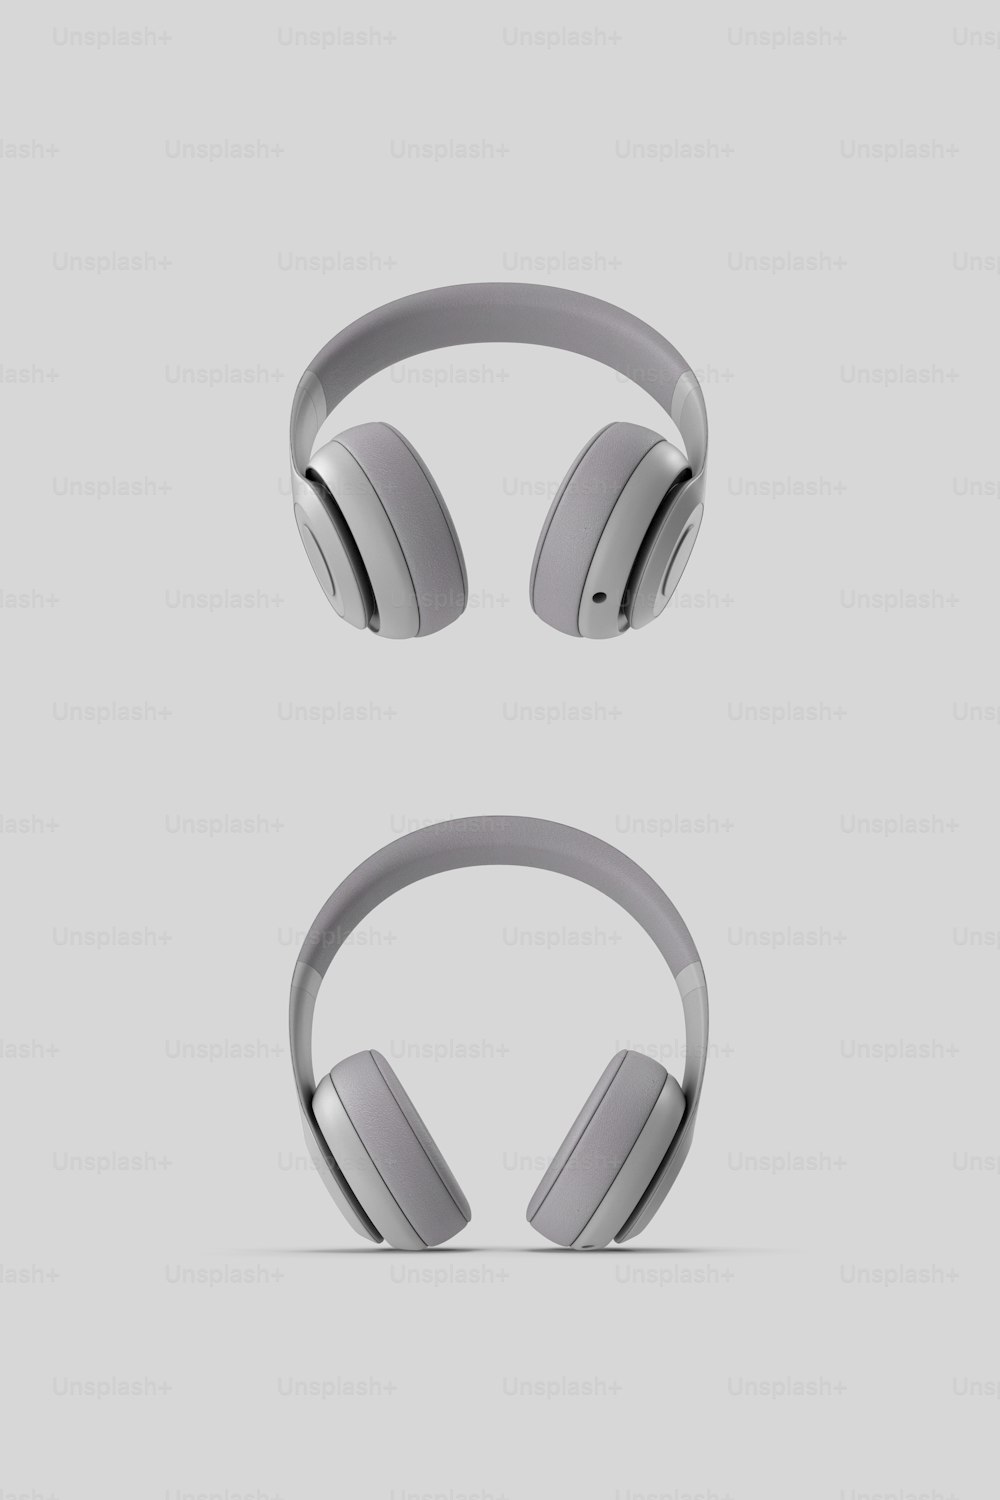 a pair of headphones sitting on top of each other